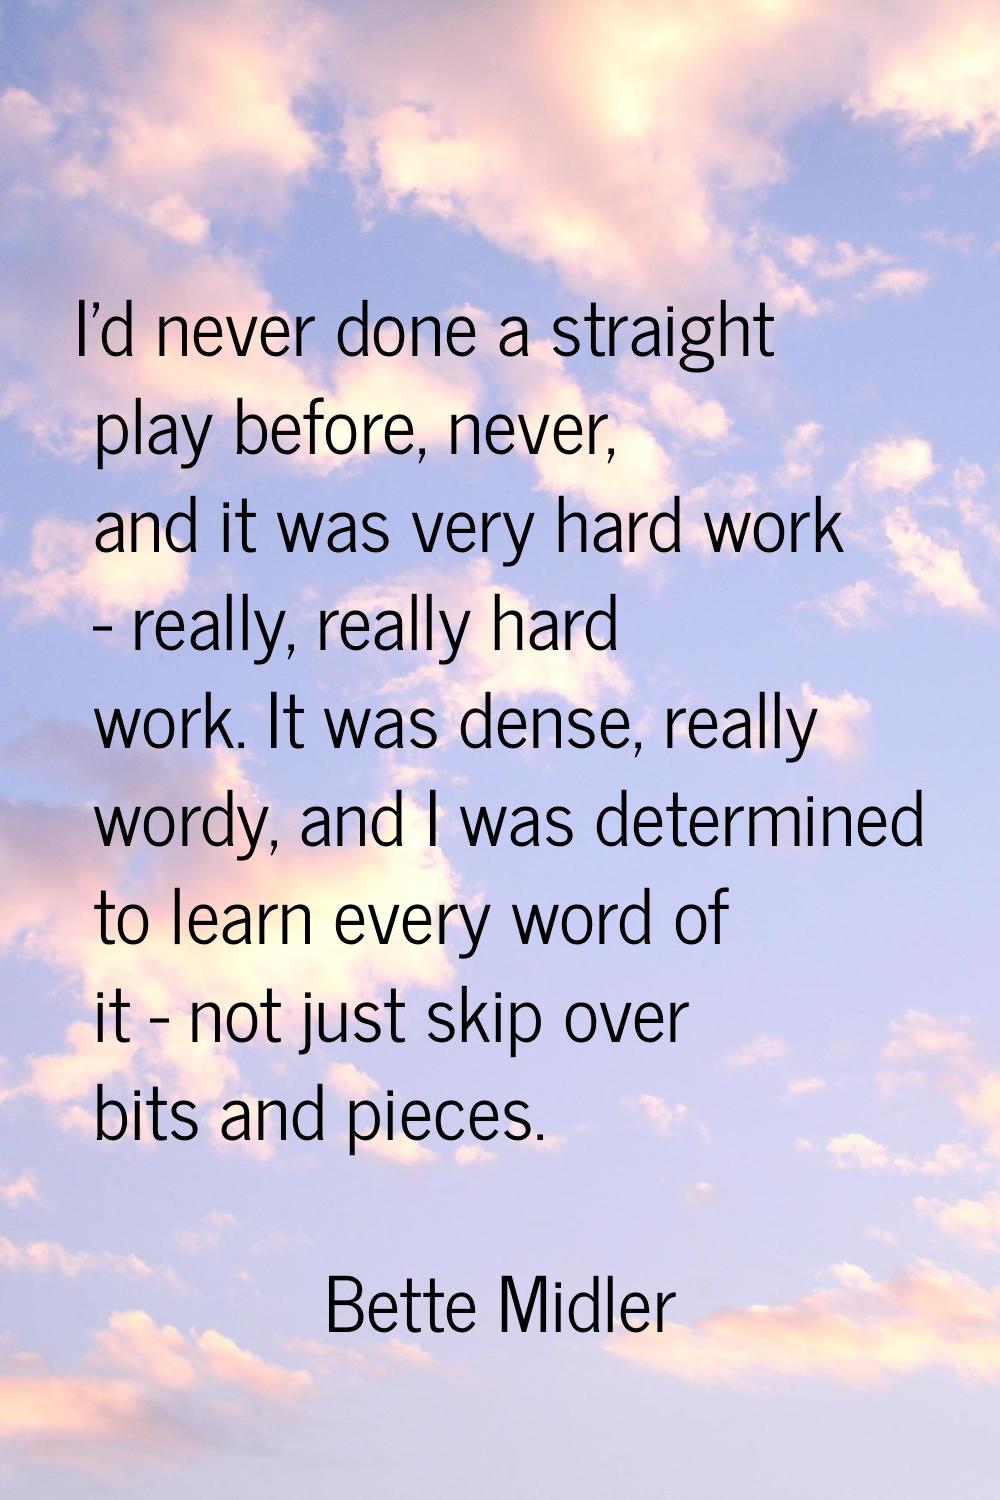 I'd never done a straight play before, never, and it was very hard work - really, really hard work.